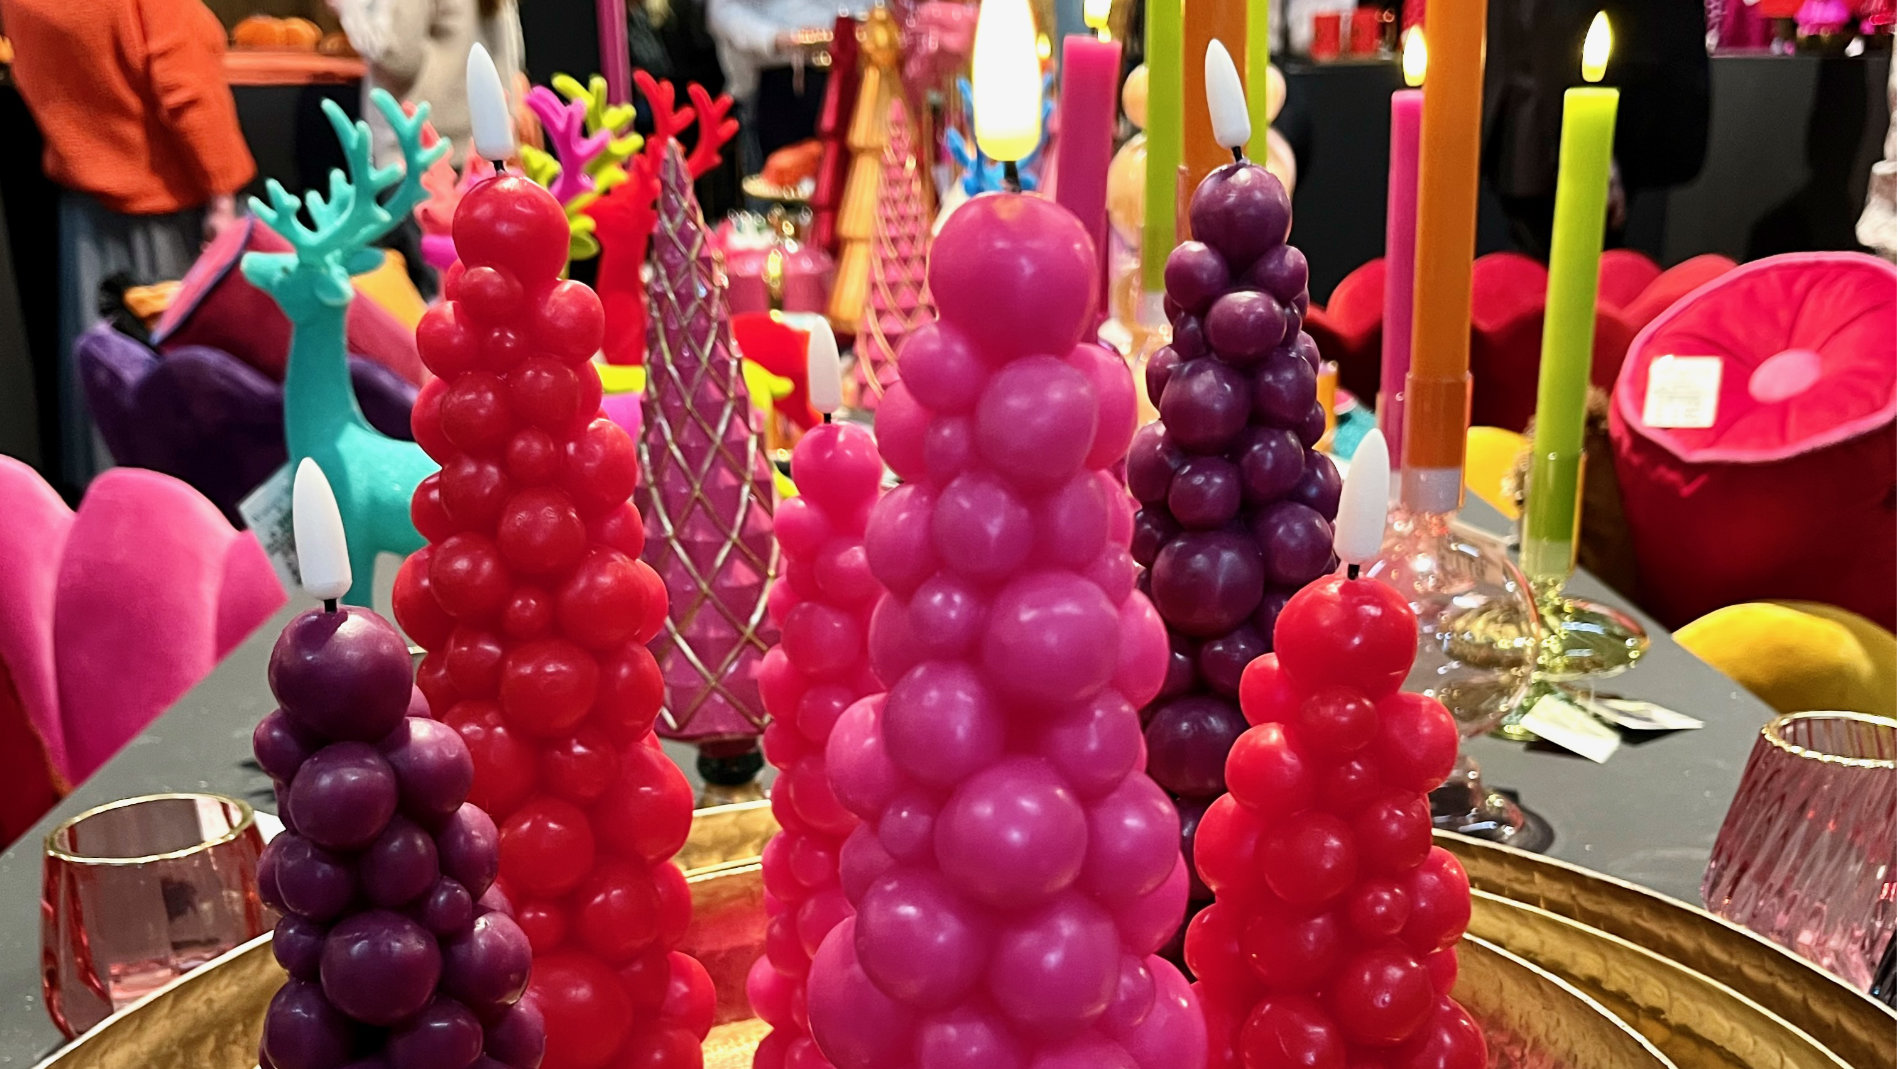 Colourful bubbles: The candles by Werner Voss. Photo: Kerstin Männer/Werner Voss.